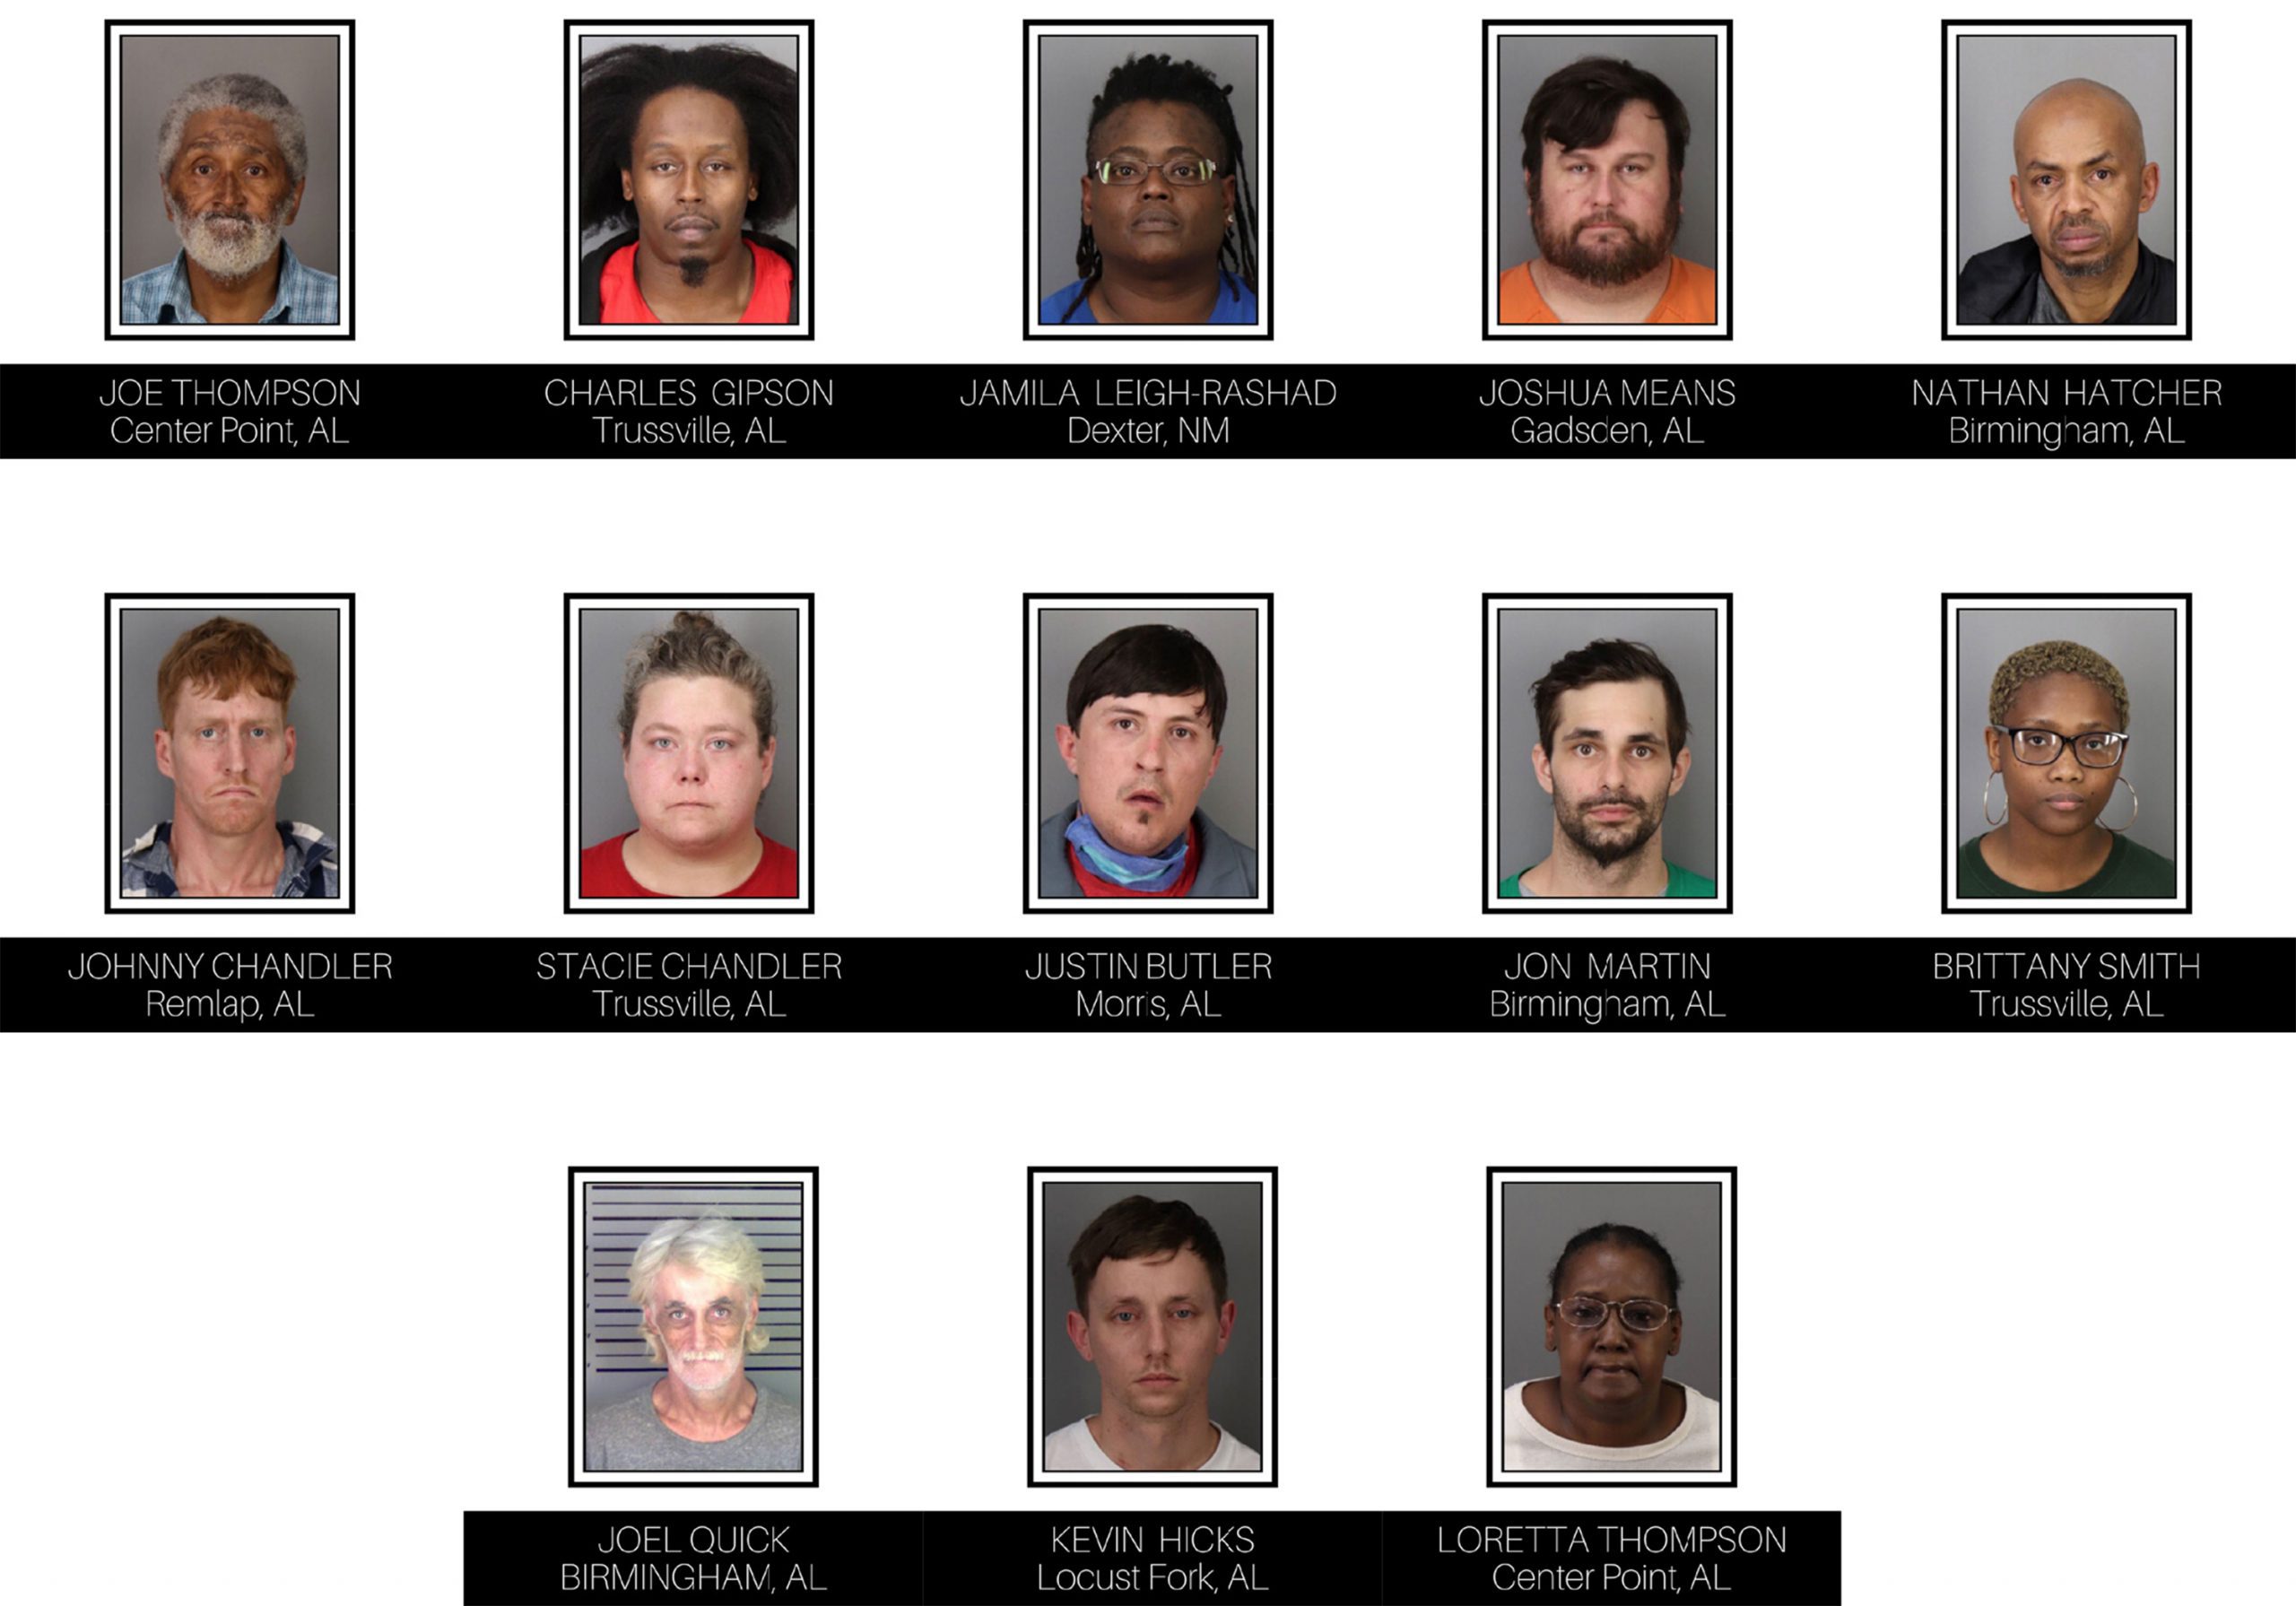 Trussville PD Shoplifting Review: Trussville residents among 13 accused of shoplifting